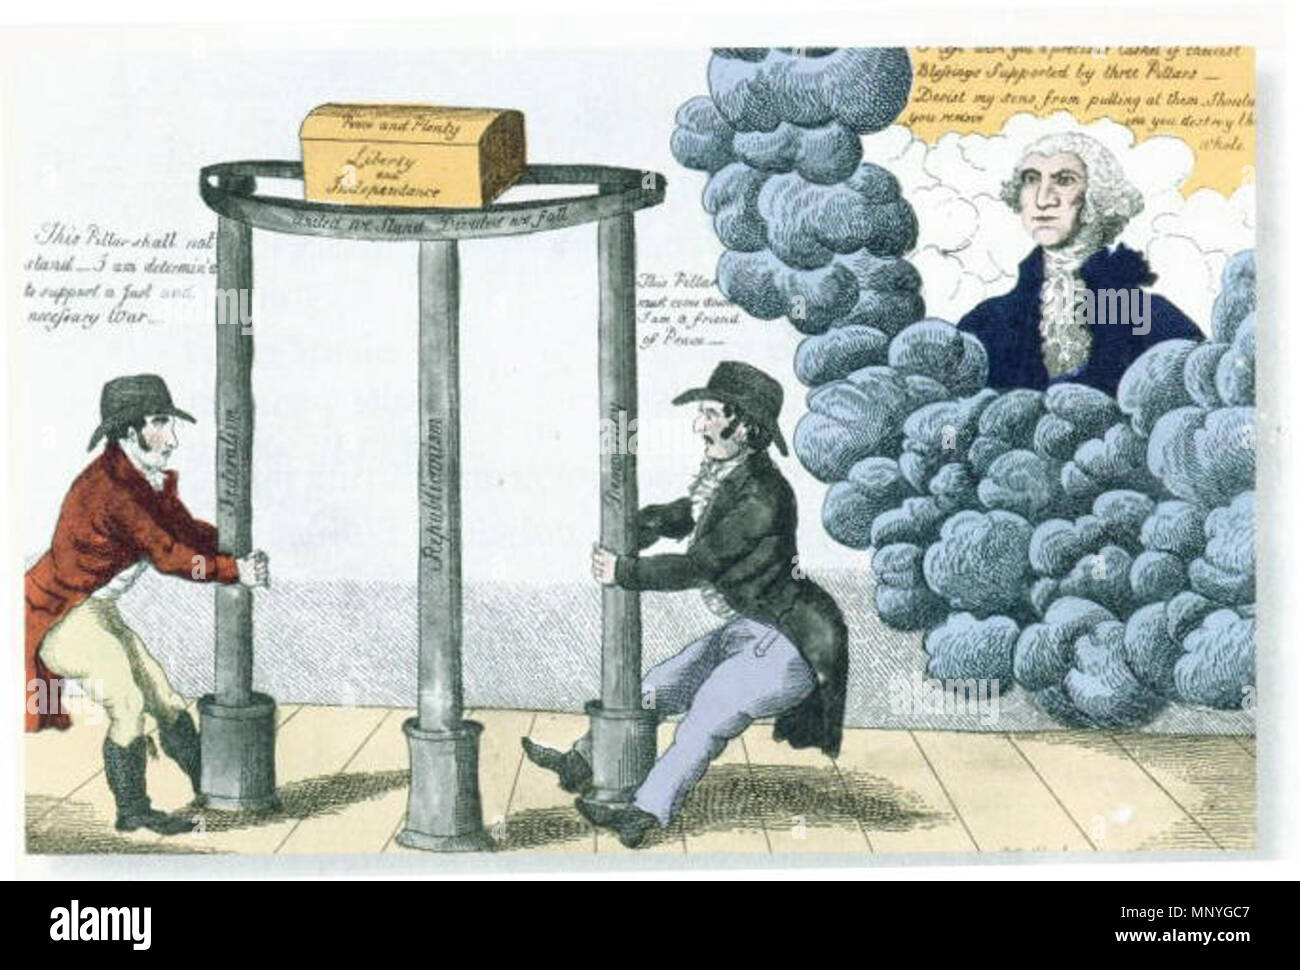 . Federalist poster about 1800. Washington (in heaven)[¿?] tells partisans to keep the pillars of Federalism, Republicanism and Democracy. Another source: A 1795 [¿? Washington died in 1799] cartoon depicting Washington warning party men to let all three pillars of Federalism, Republicanism, and Democracy stand to hold up Peace and Plenty, Liberty and Independence. At the left a Democrat says 'This Pillar shall not stand I am determin'd to support a just and necessary War” and at the right a Federalists claims, 'This Pillar must come down I am a friend of Peace'. circa 1800. Unknown 1287 part Stock Photo